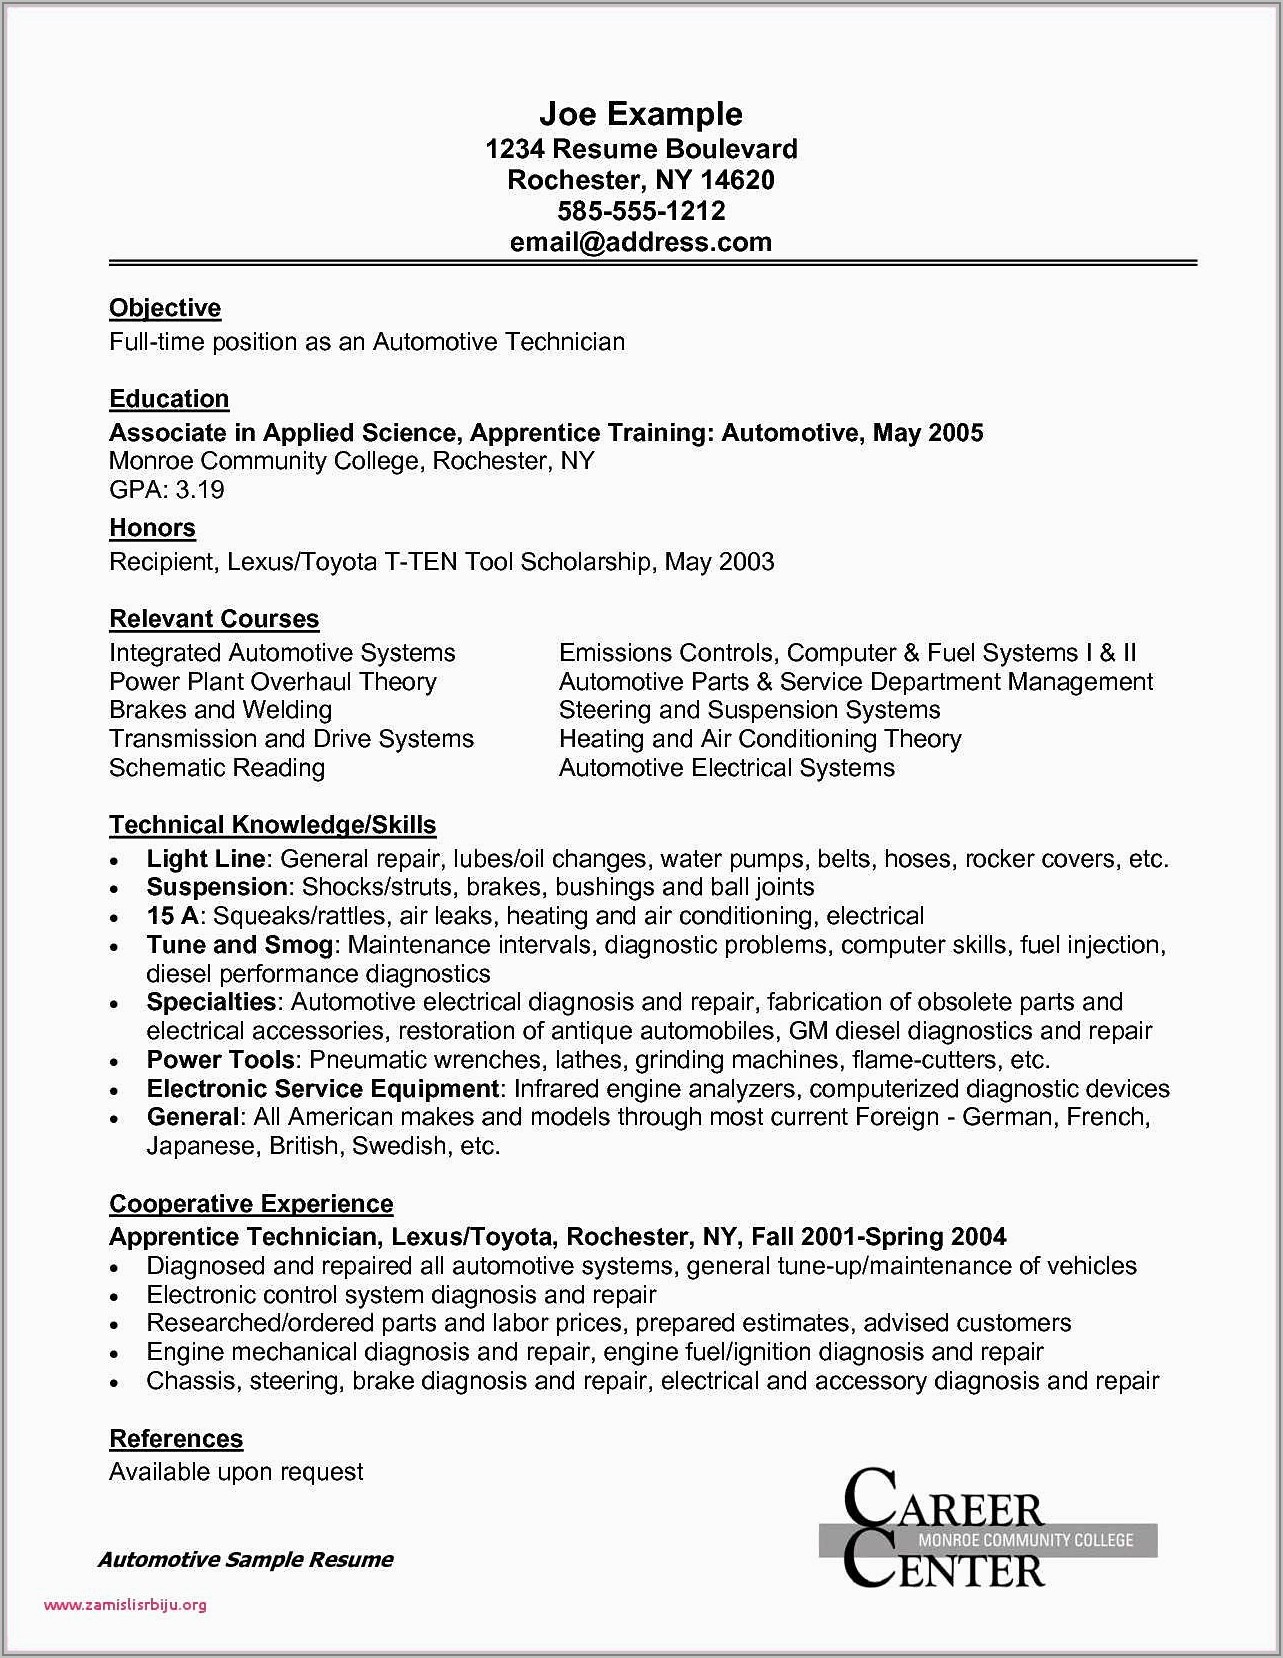 Free Resume Templates For Electricians